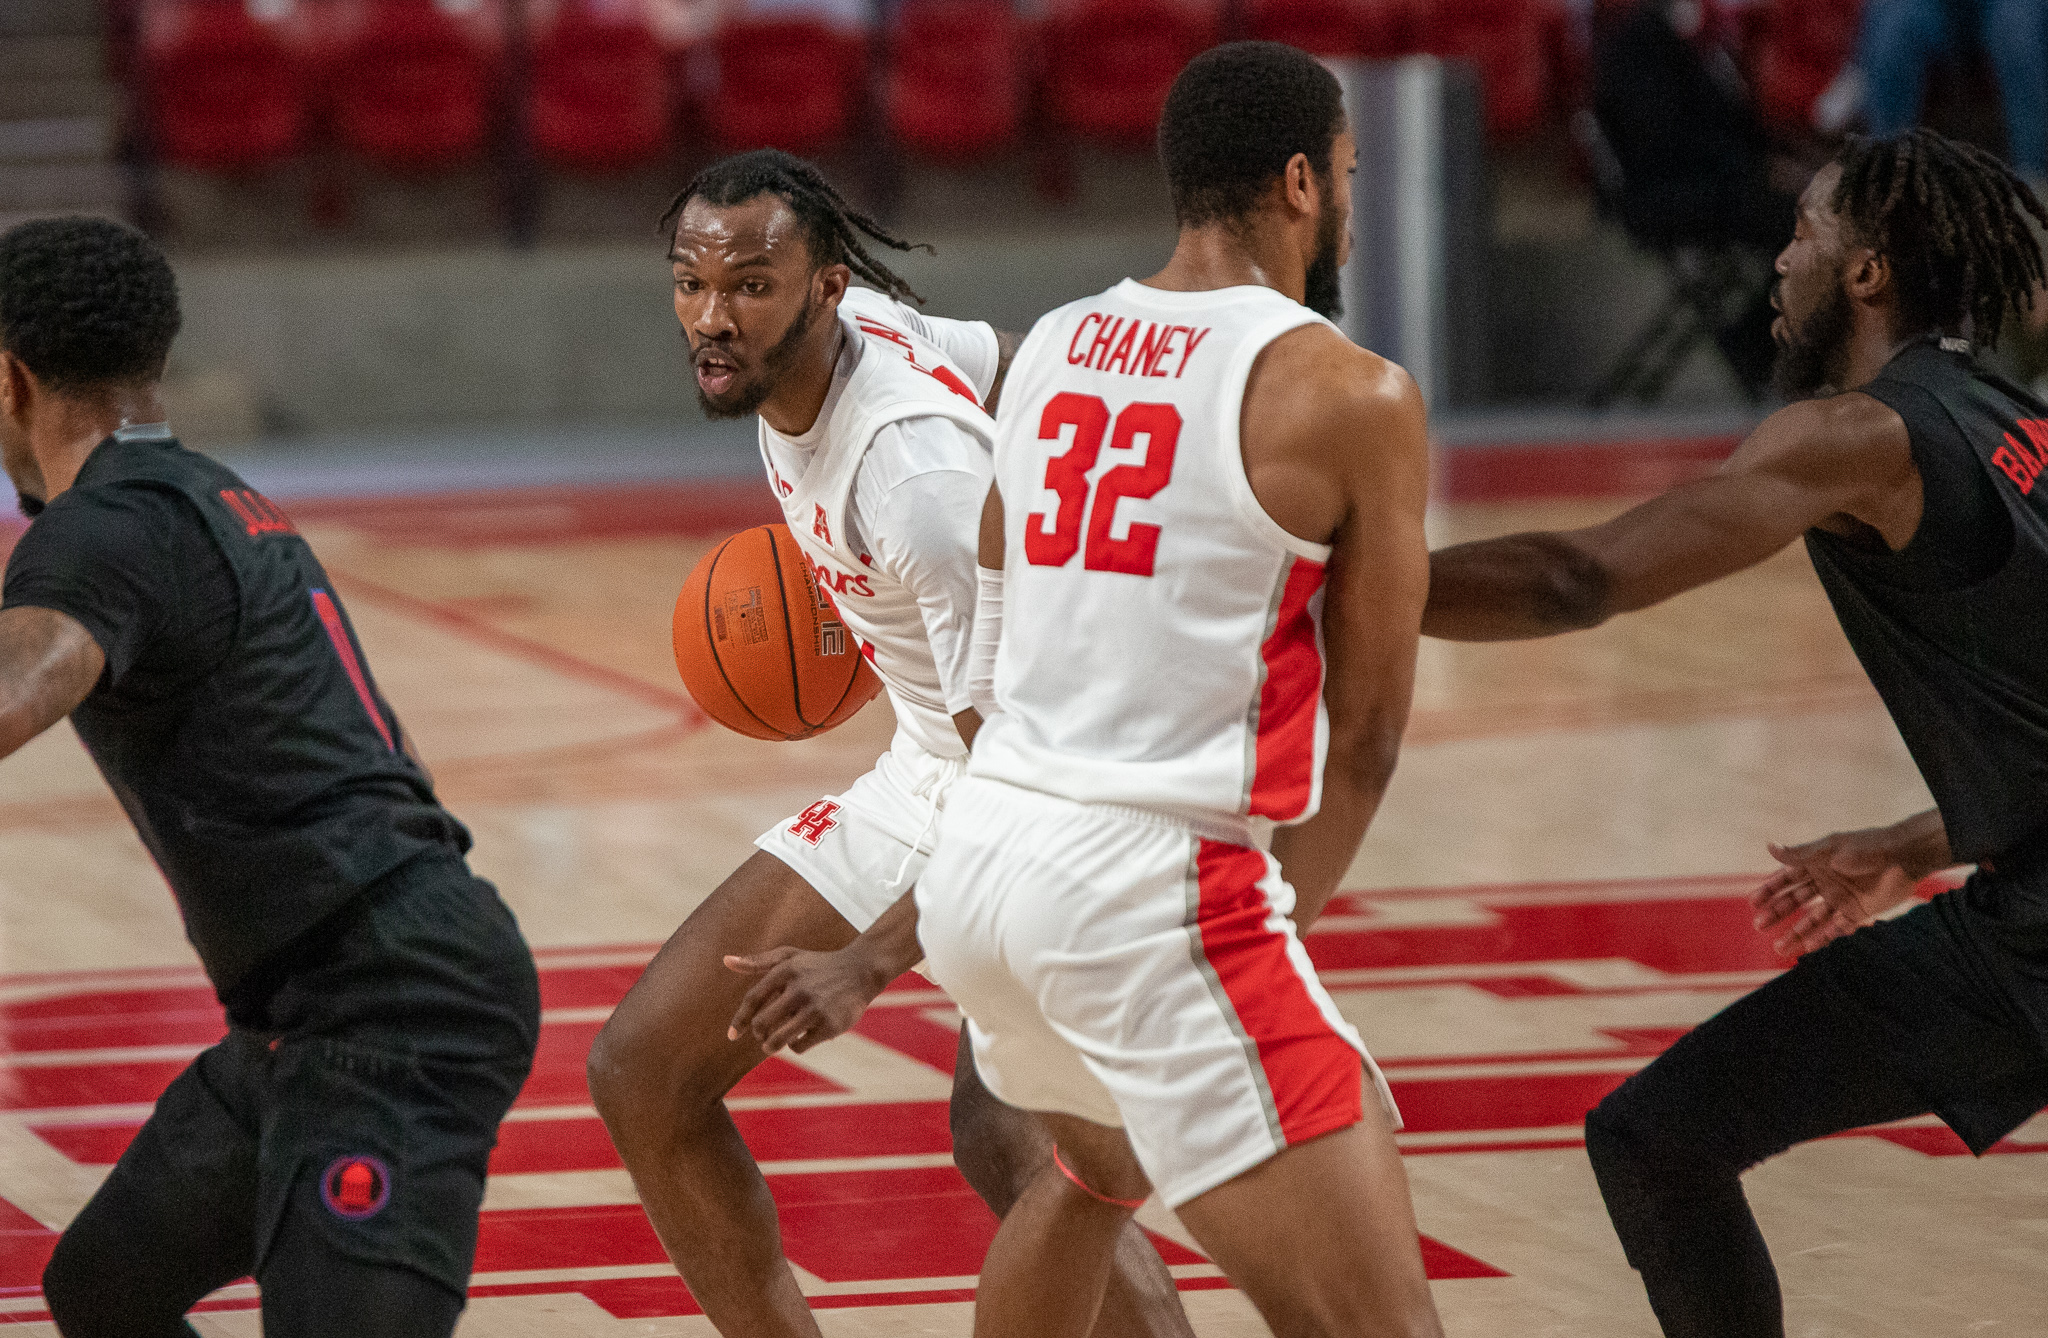 UH senior guard DeJon Jarreau, who had a season-high eight rebounds in the win against USF, uses the screen set by junior forward Reggie Chaney (32) in a game against SMU on Jan. 31. | Andy Yanez/The Cougar